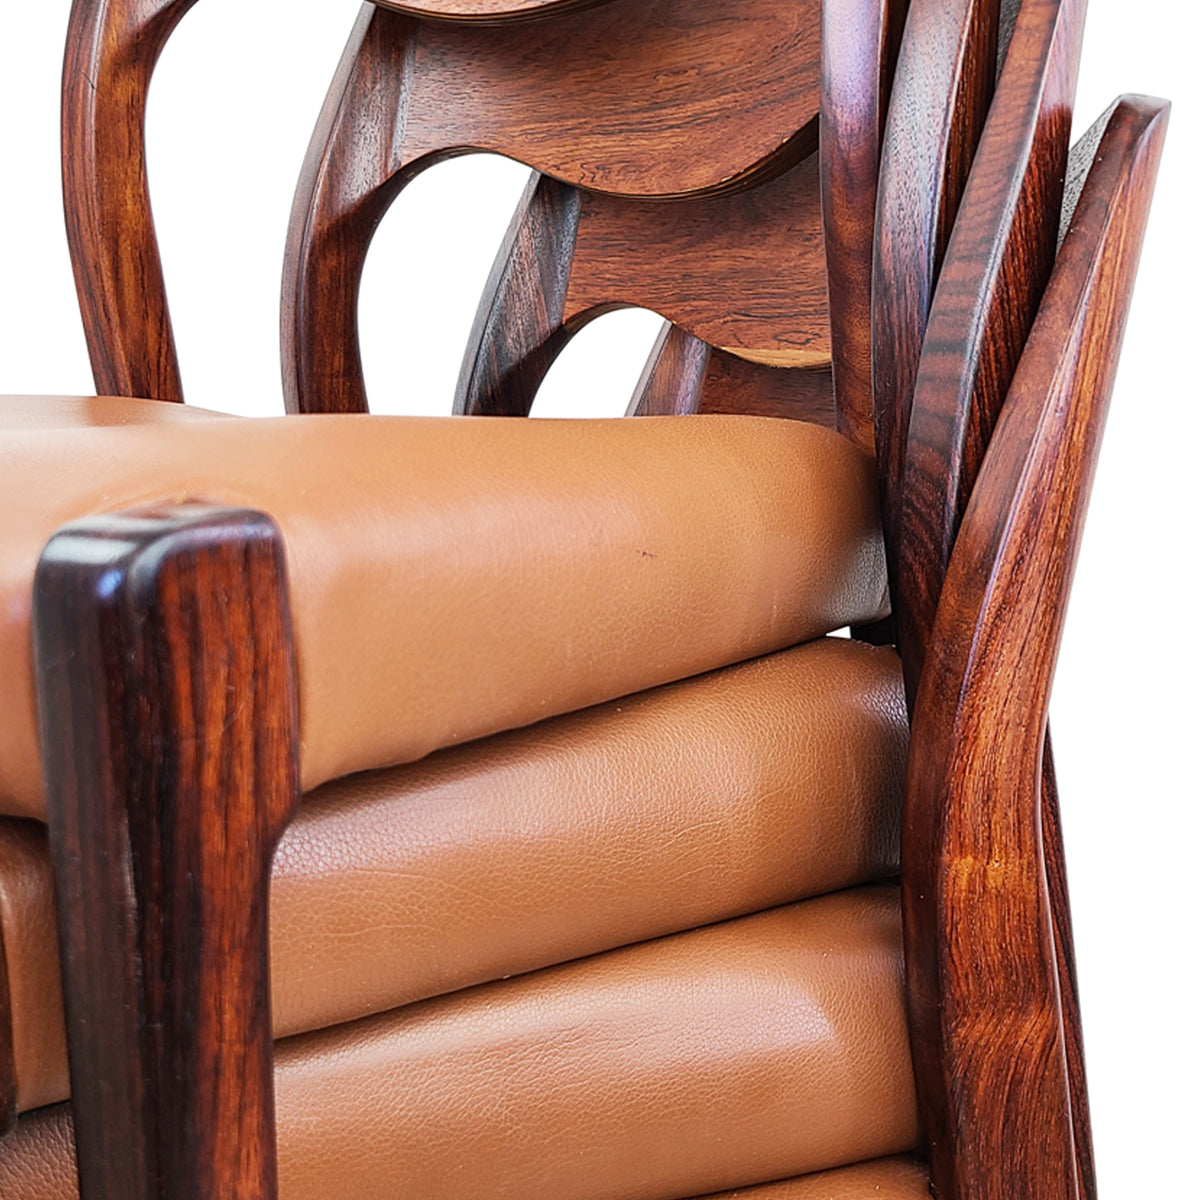 Moller Model 71 Chairs in Rosewood